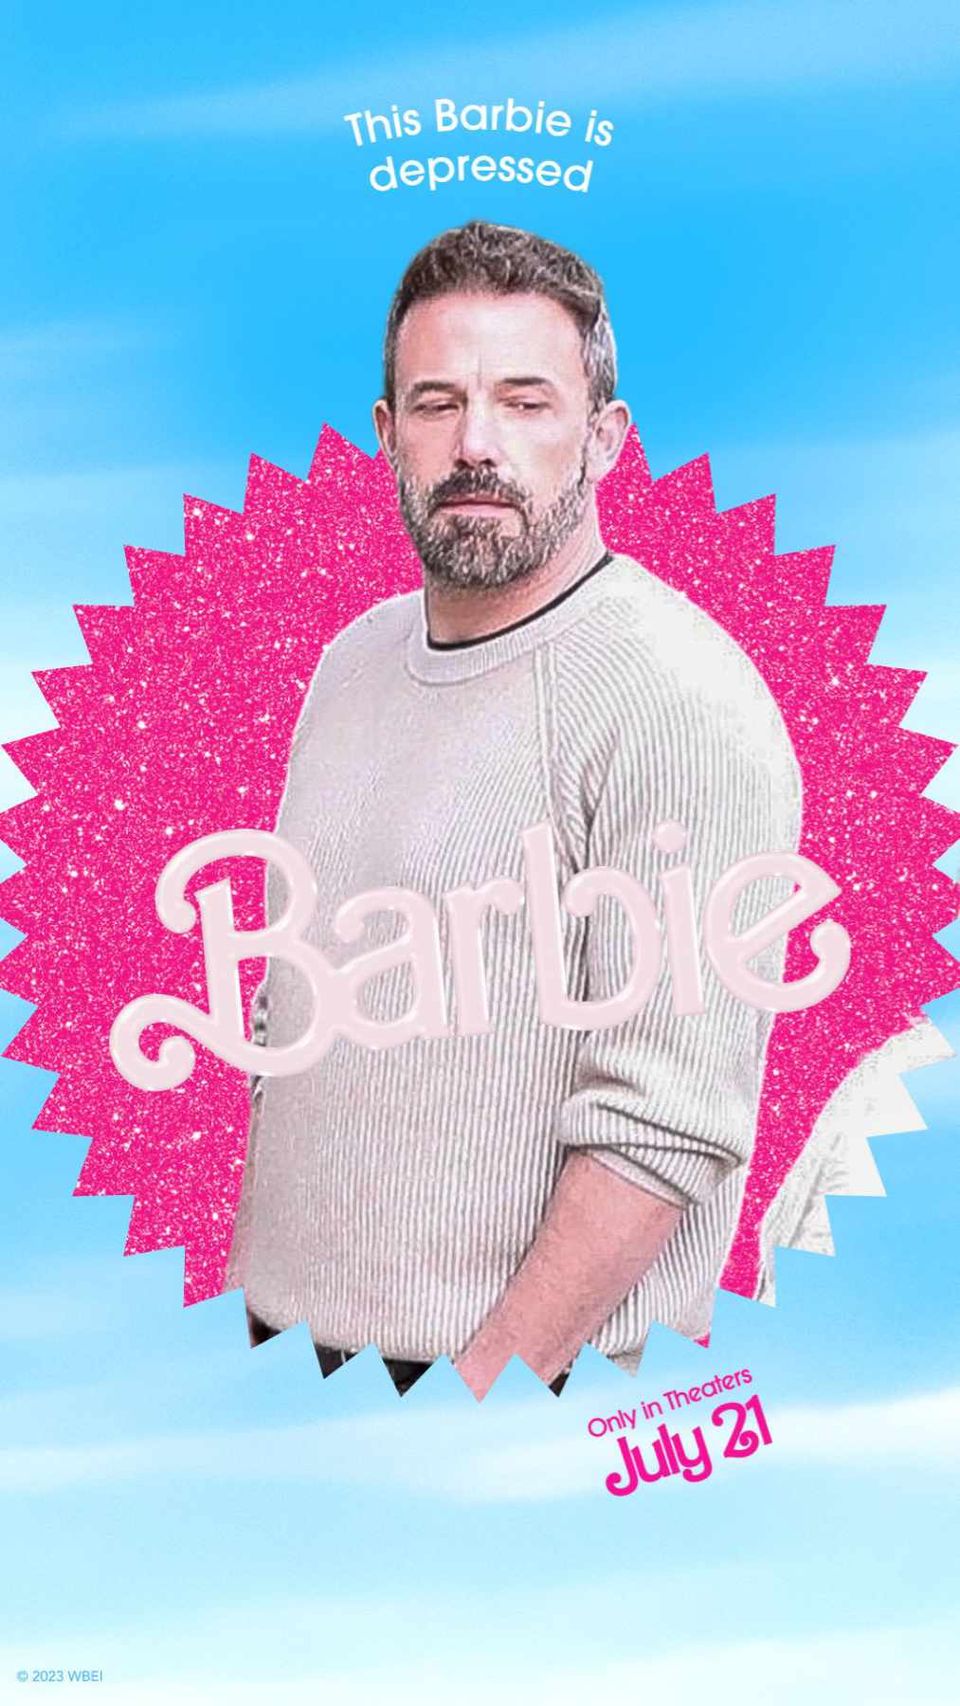 the-barbie-cast-movie-poster-memes-just-got-real